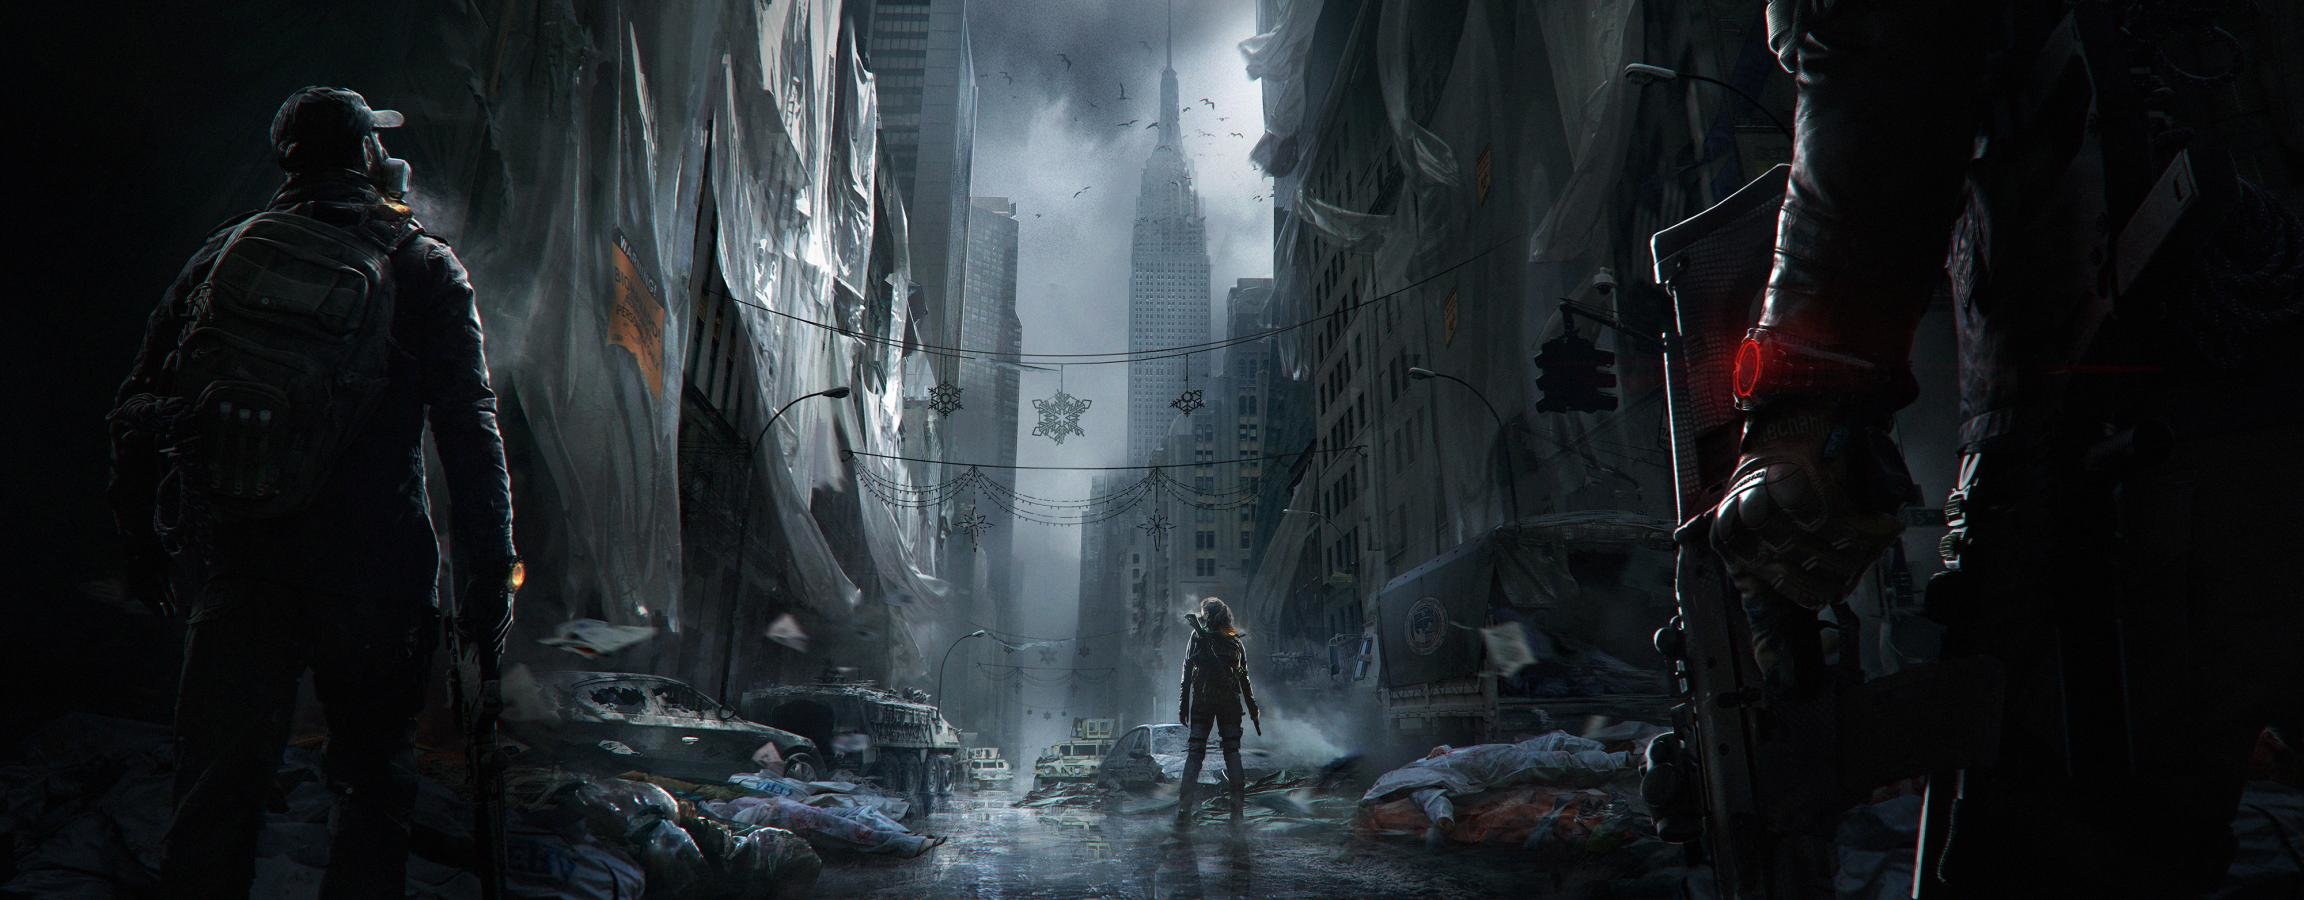 Download dual screen 2304x900 Tom Clancy's The Division desktop background ID:450064 for free